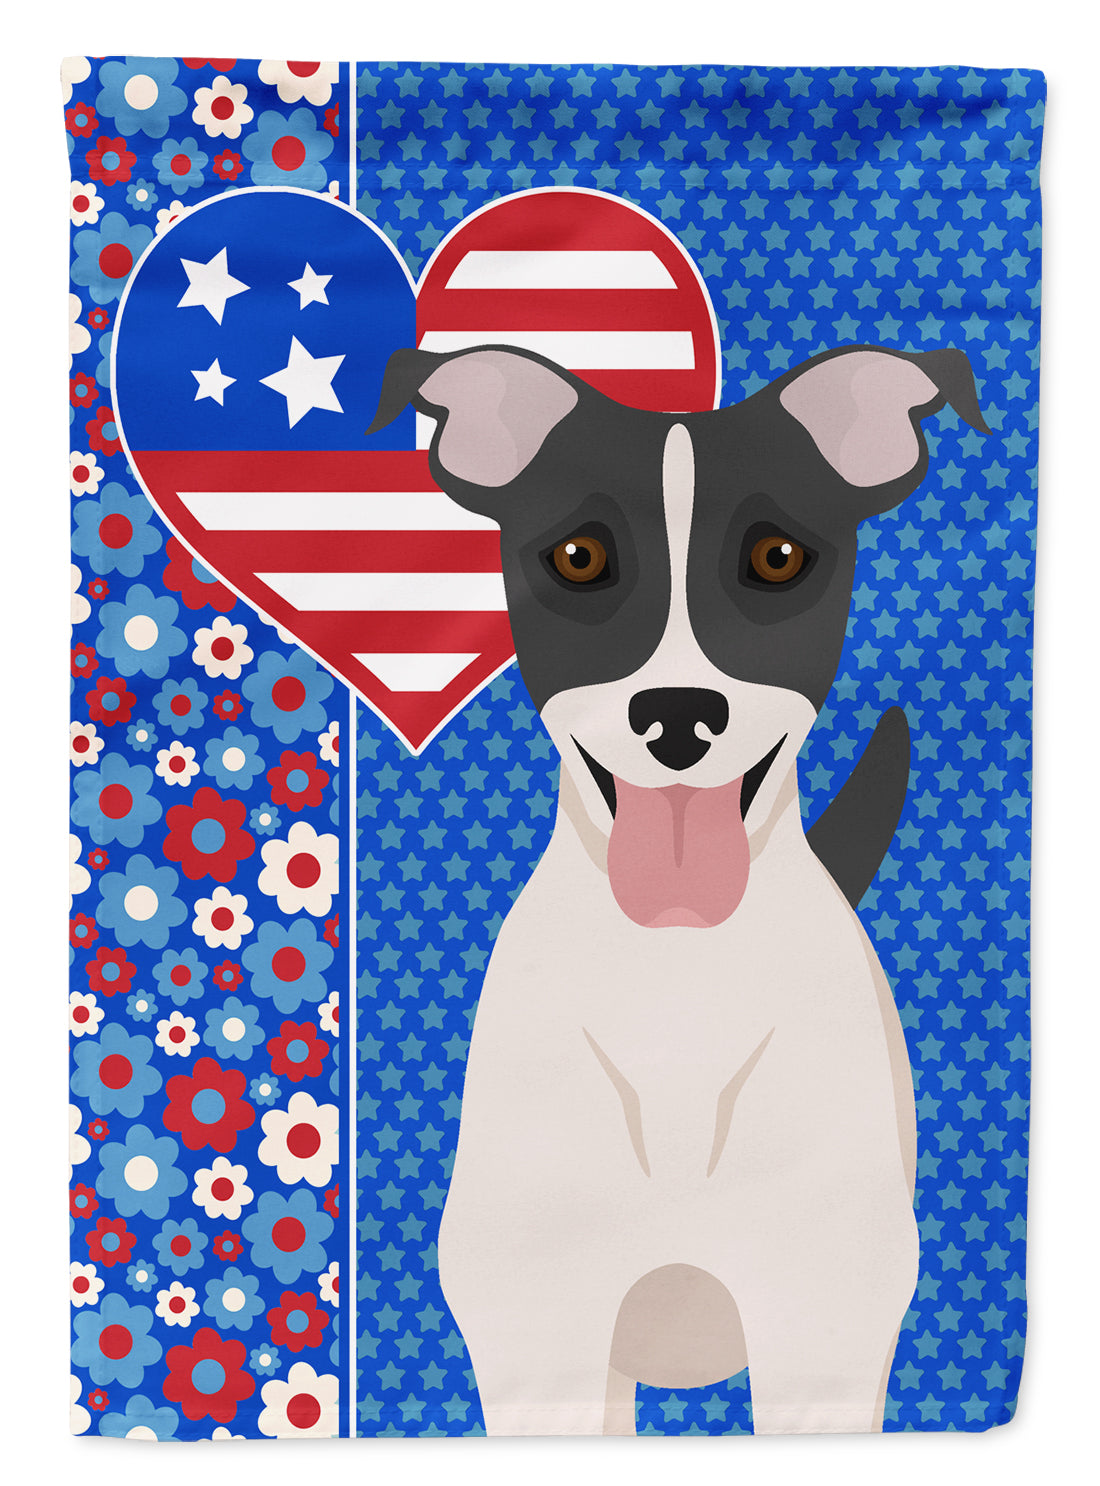 Black White Smooth Jack Russell Terrier USA American Flag Garden Size